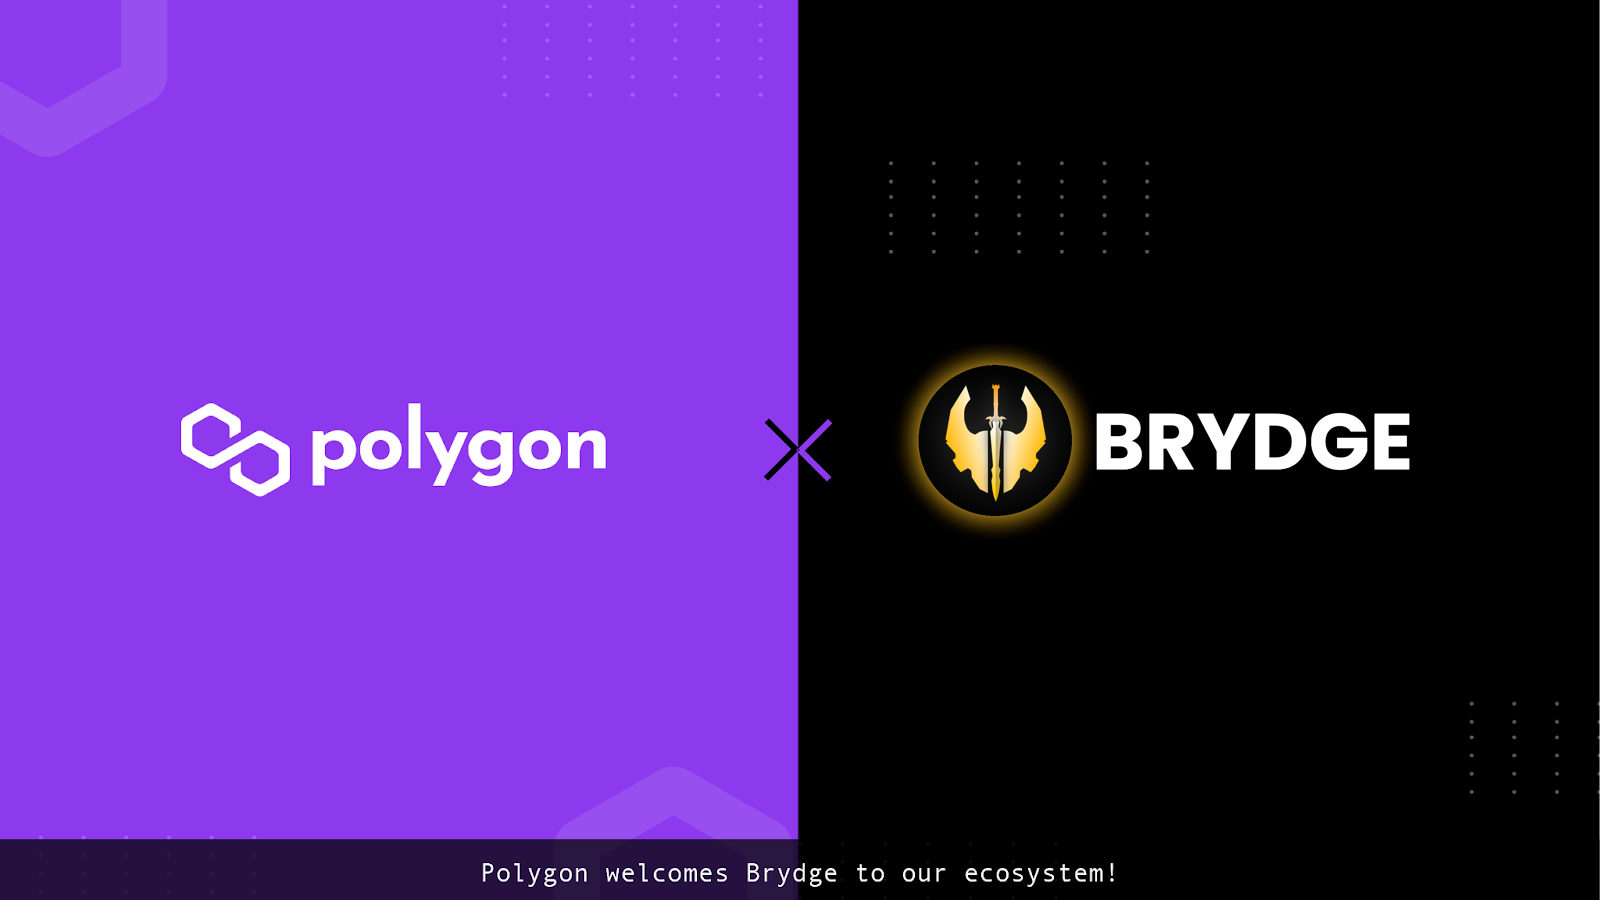 Cover Image for Welcome Brydge to the Polygon Family